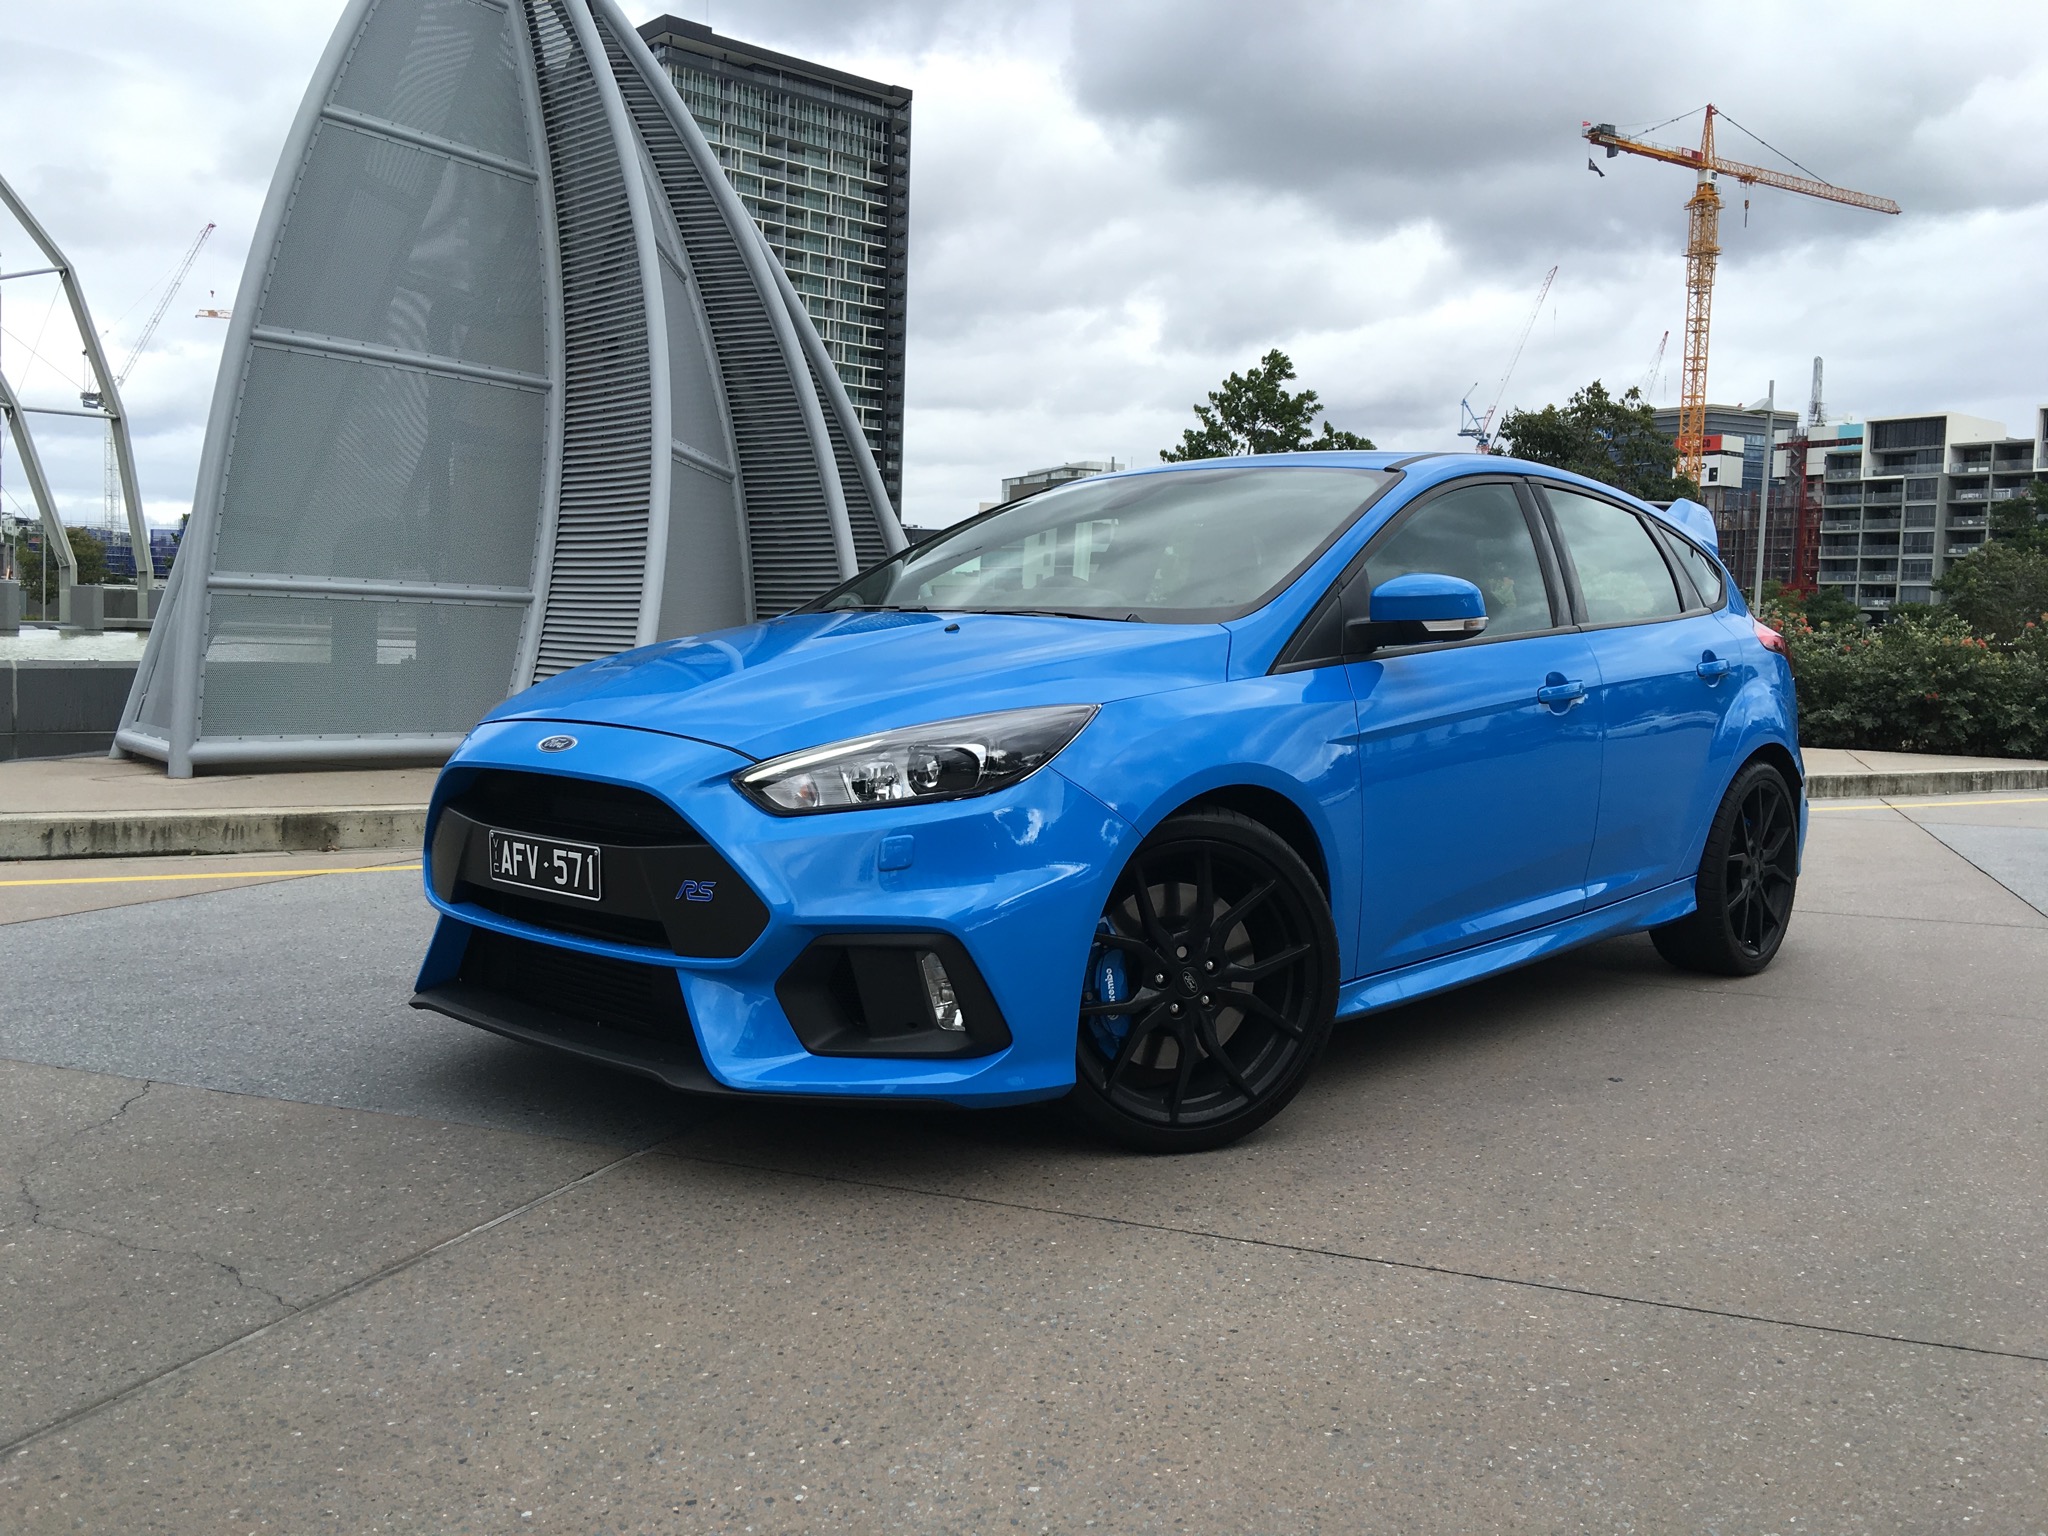 2017 Ford Focus RS Review | CarAdvice